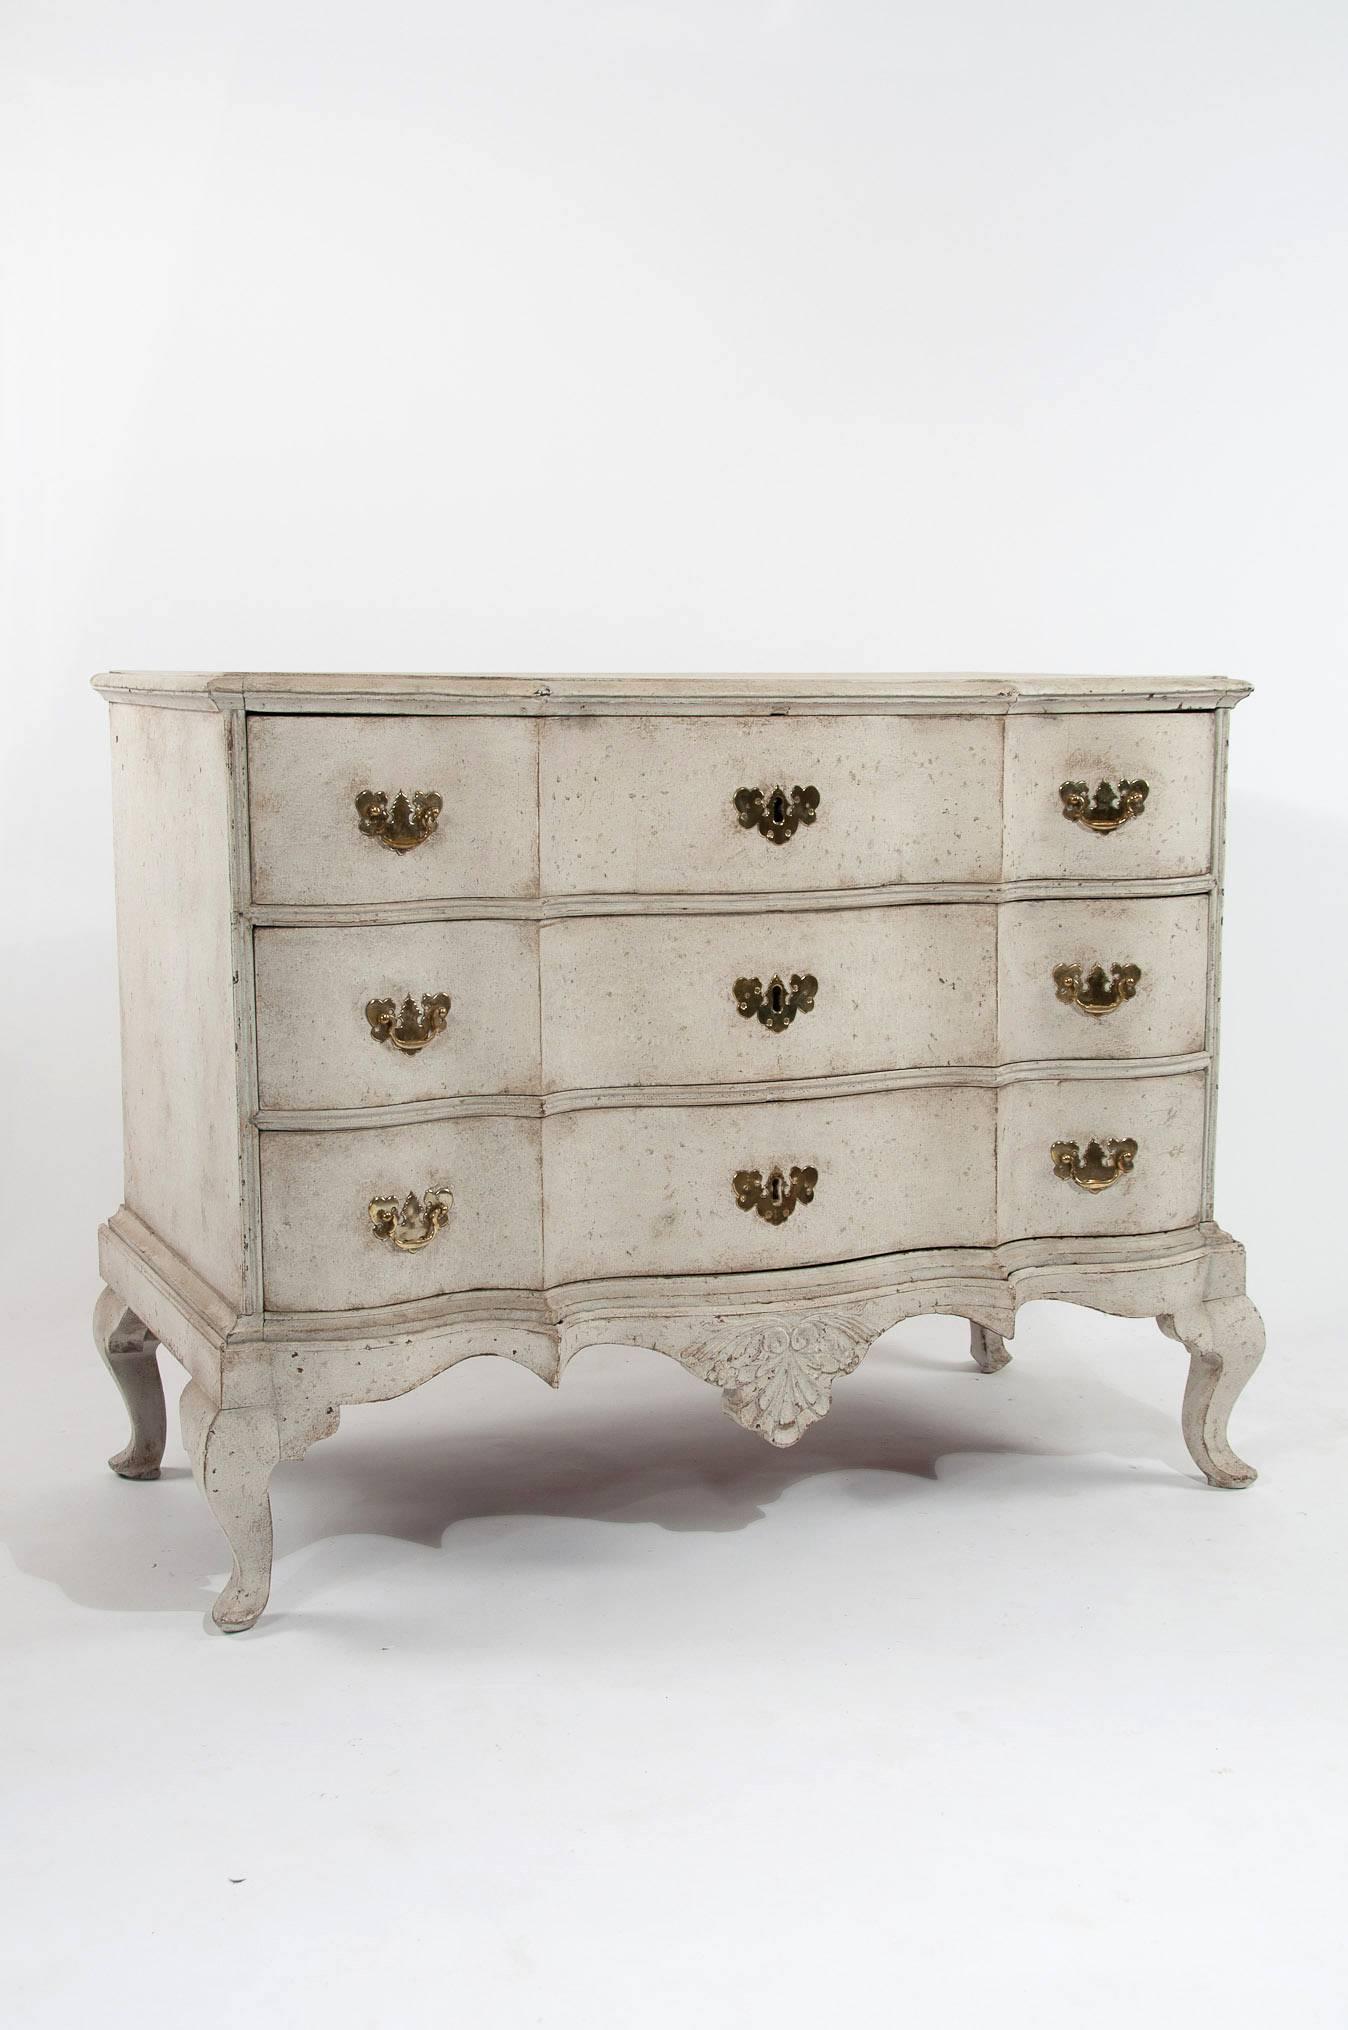 Of stunning form a Scandinavian mid 18th Century painted shaped chest of drawers / commode. 
This extremely attractive Baroque chest of drawers has a beautiful faux marble grained shaped top over three solid shaped drawers retaining their original